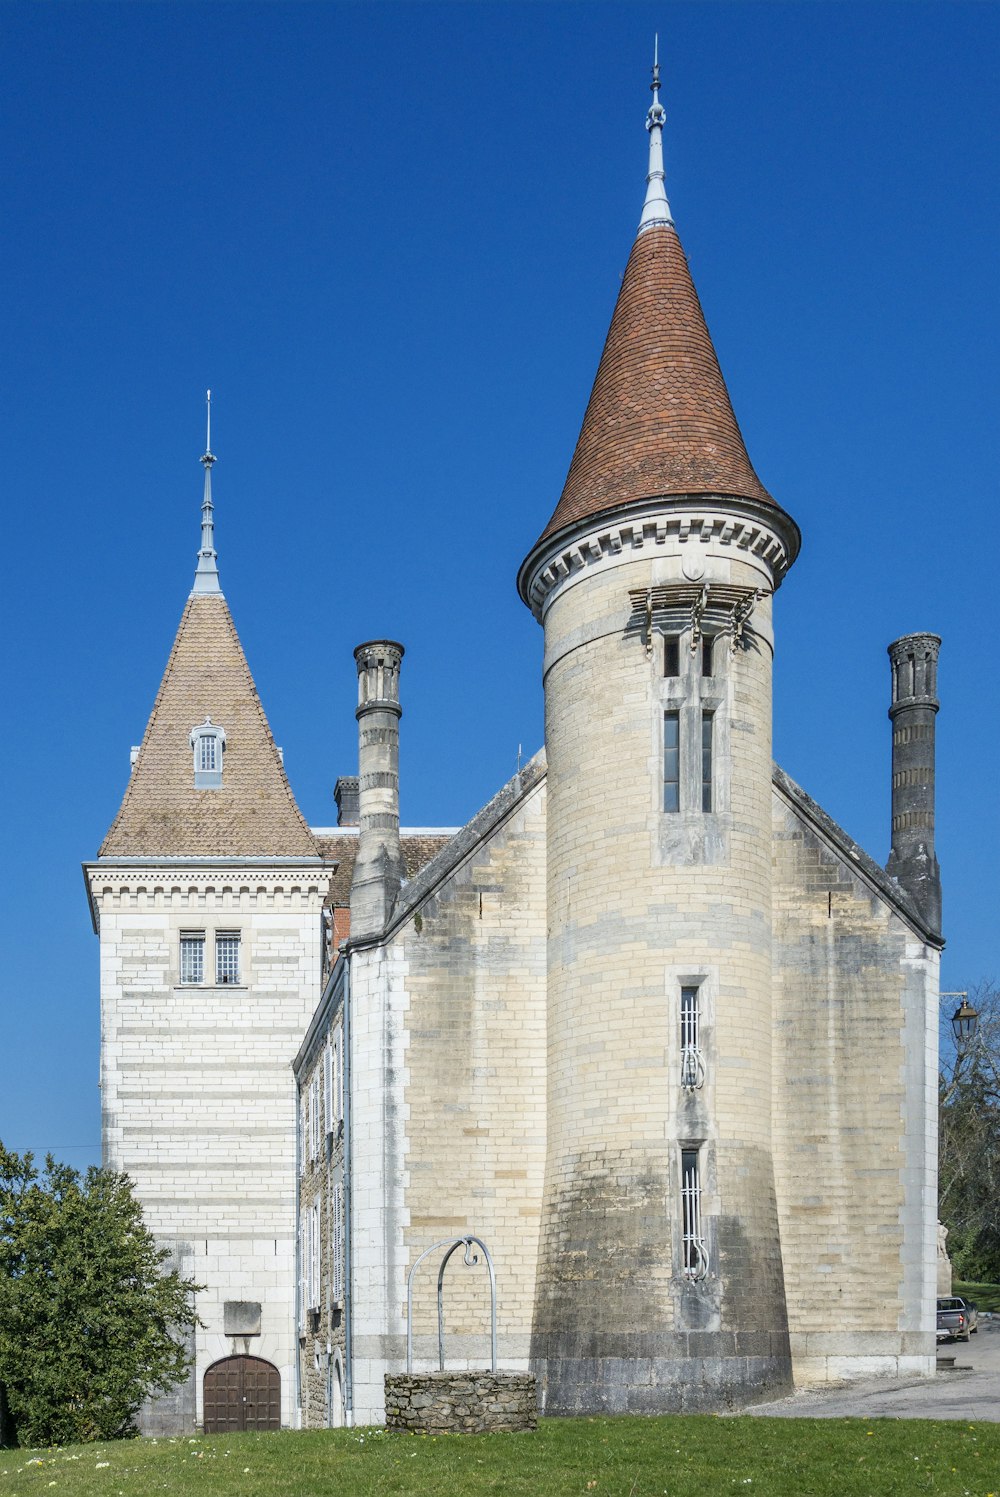 a large stone building with towers